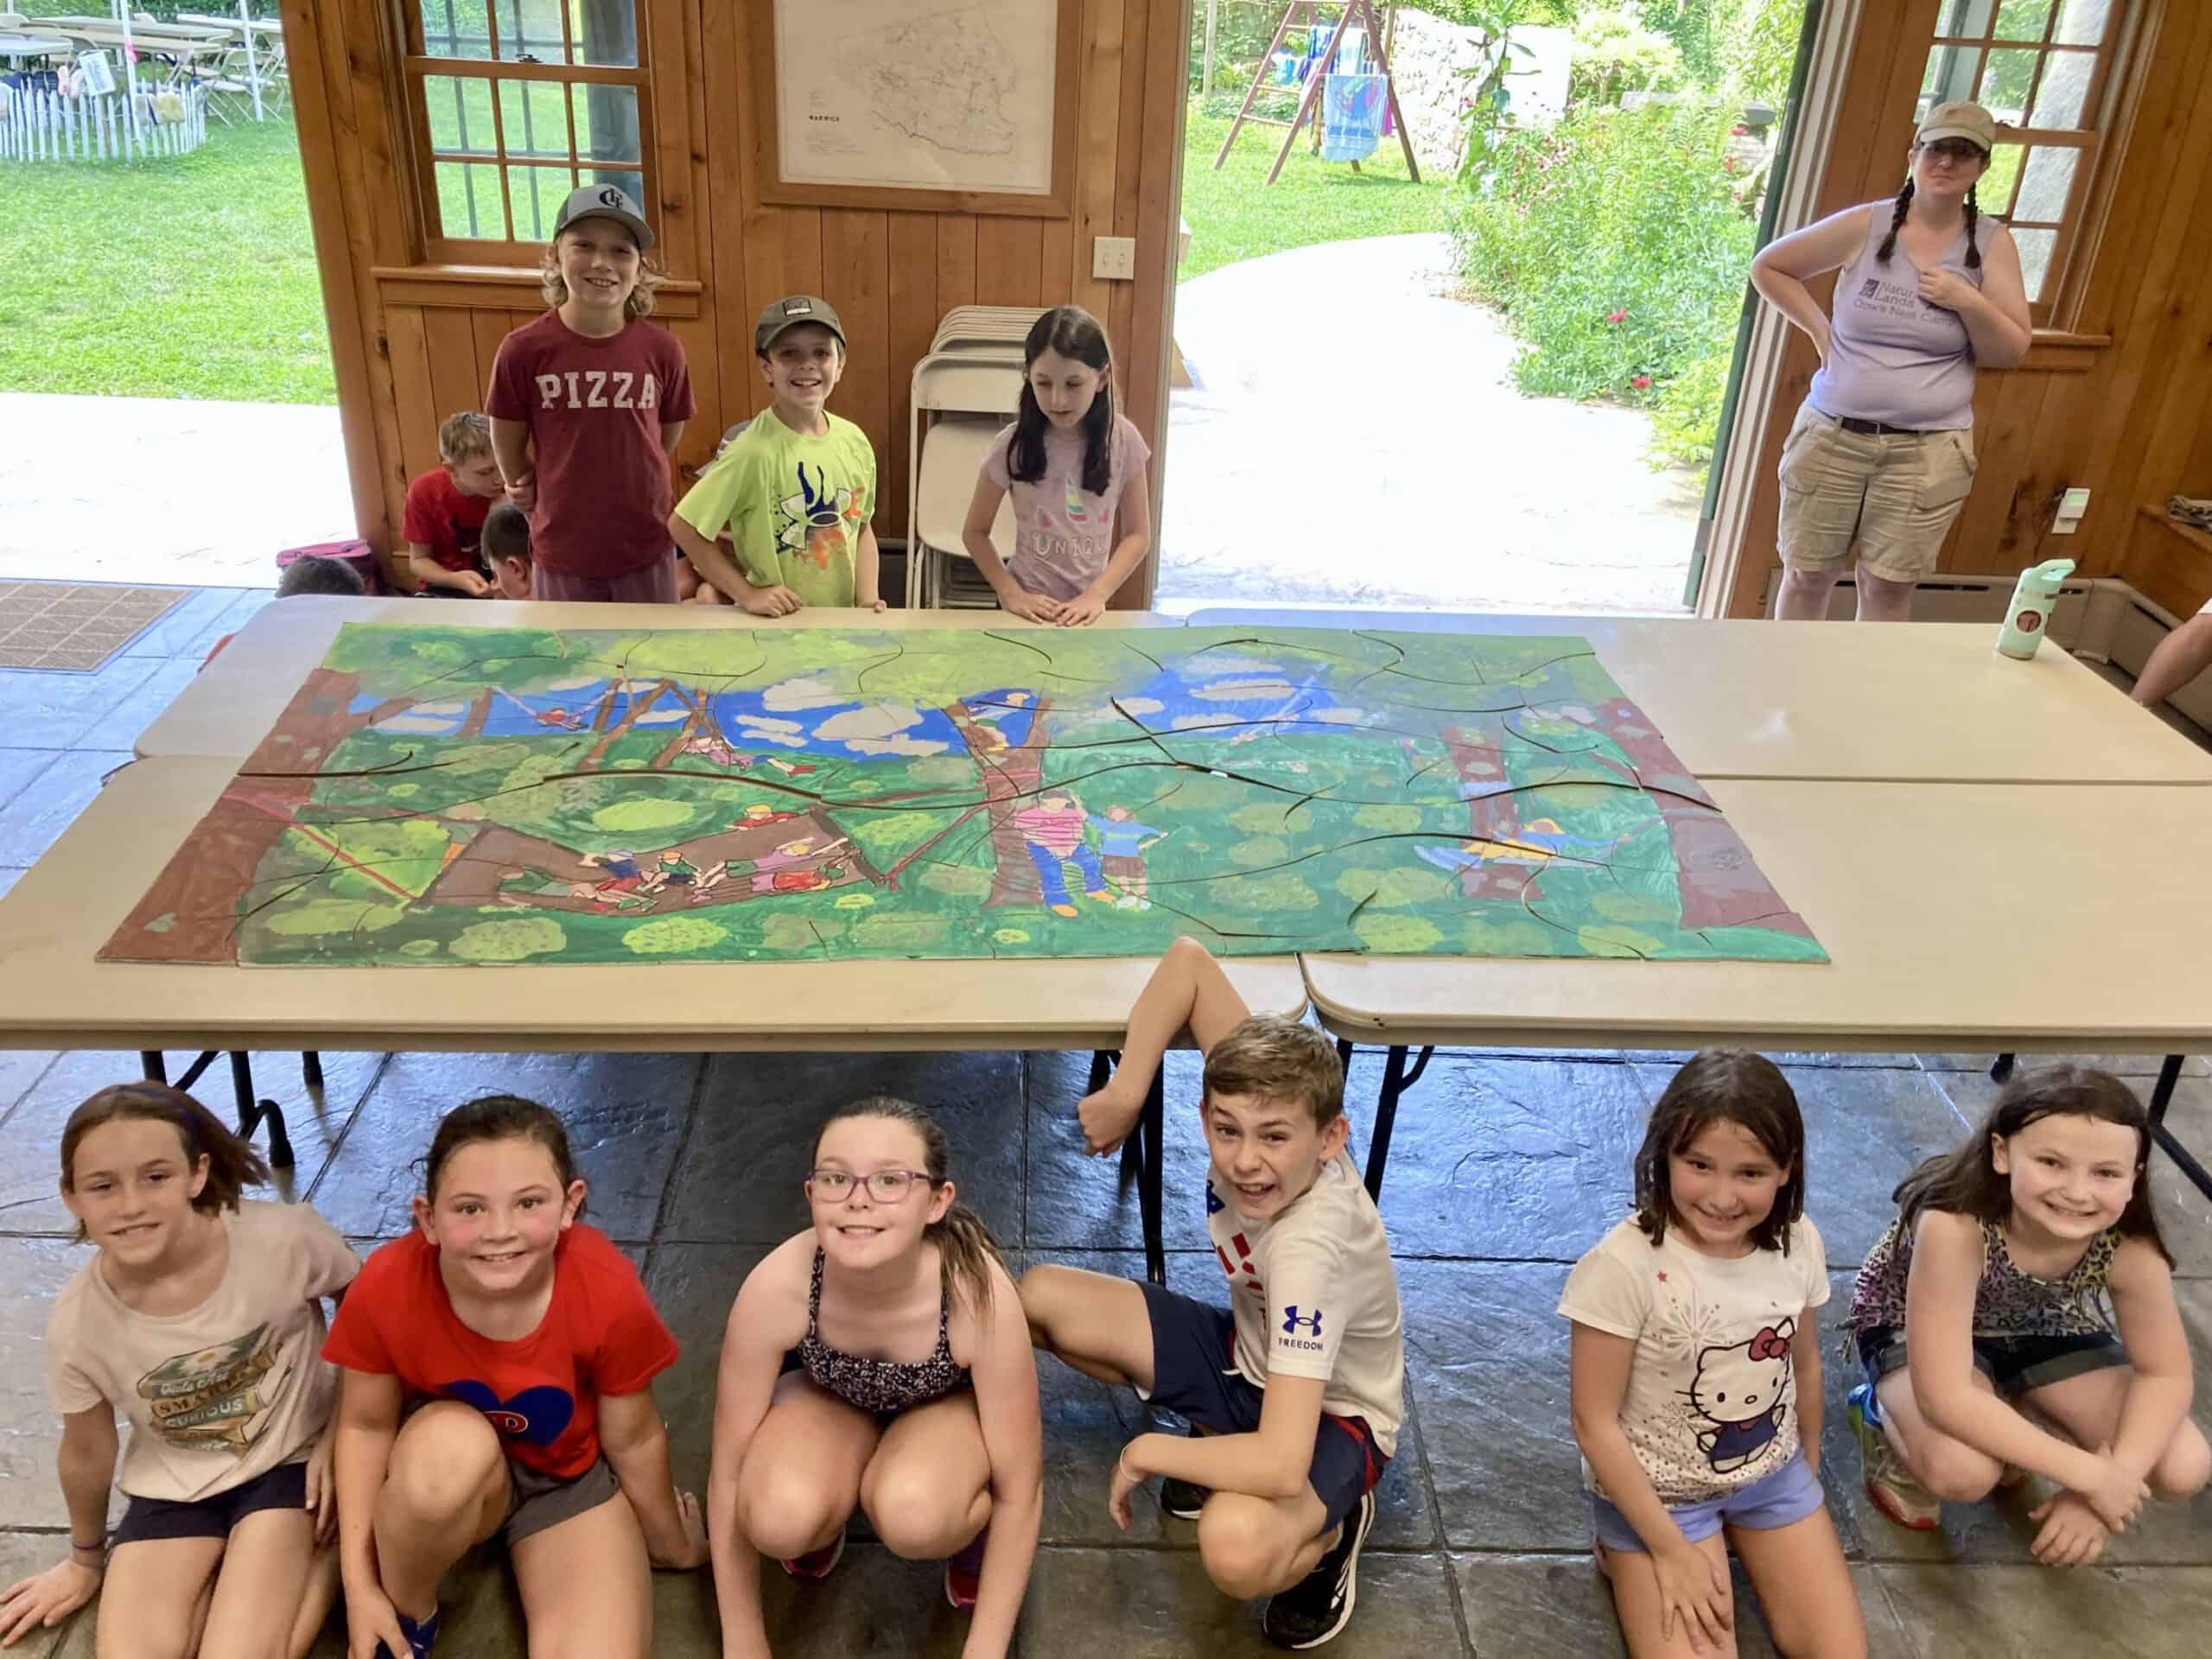 Kids posing with a giant puzzle they completed